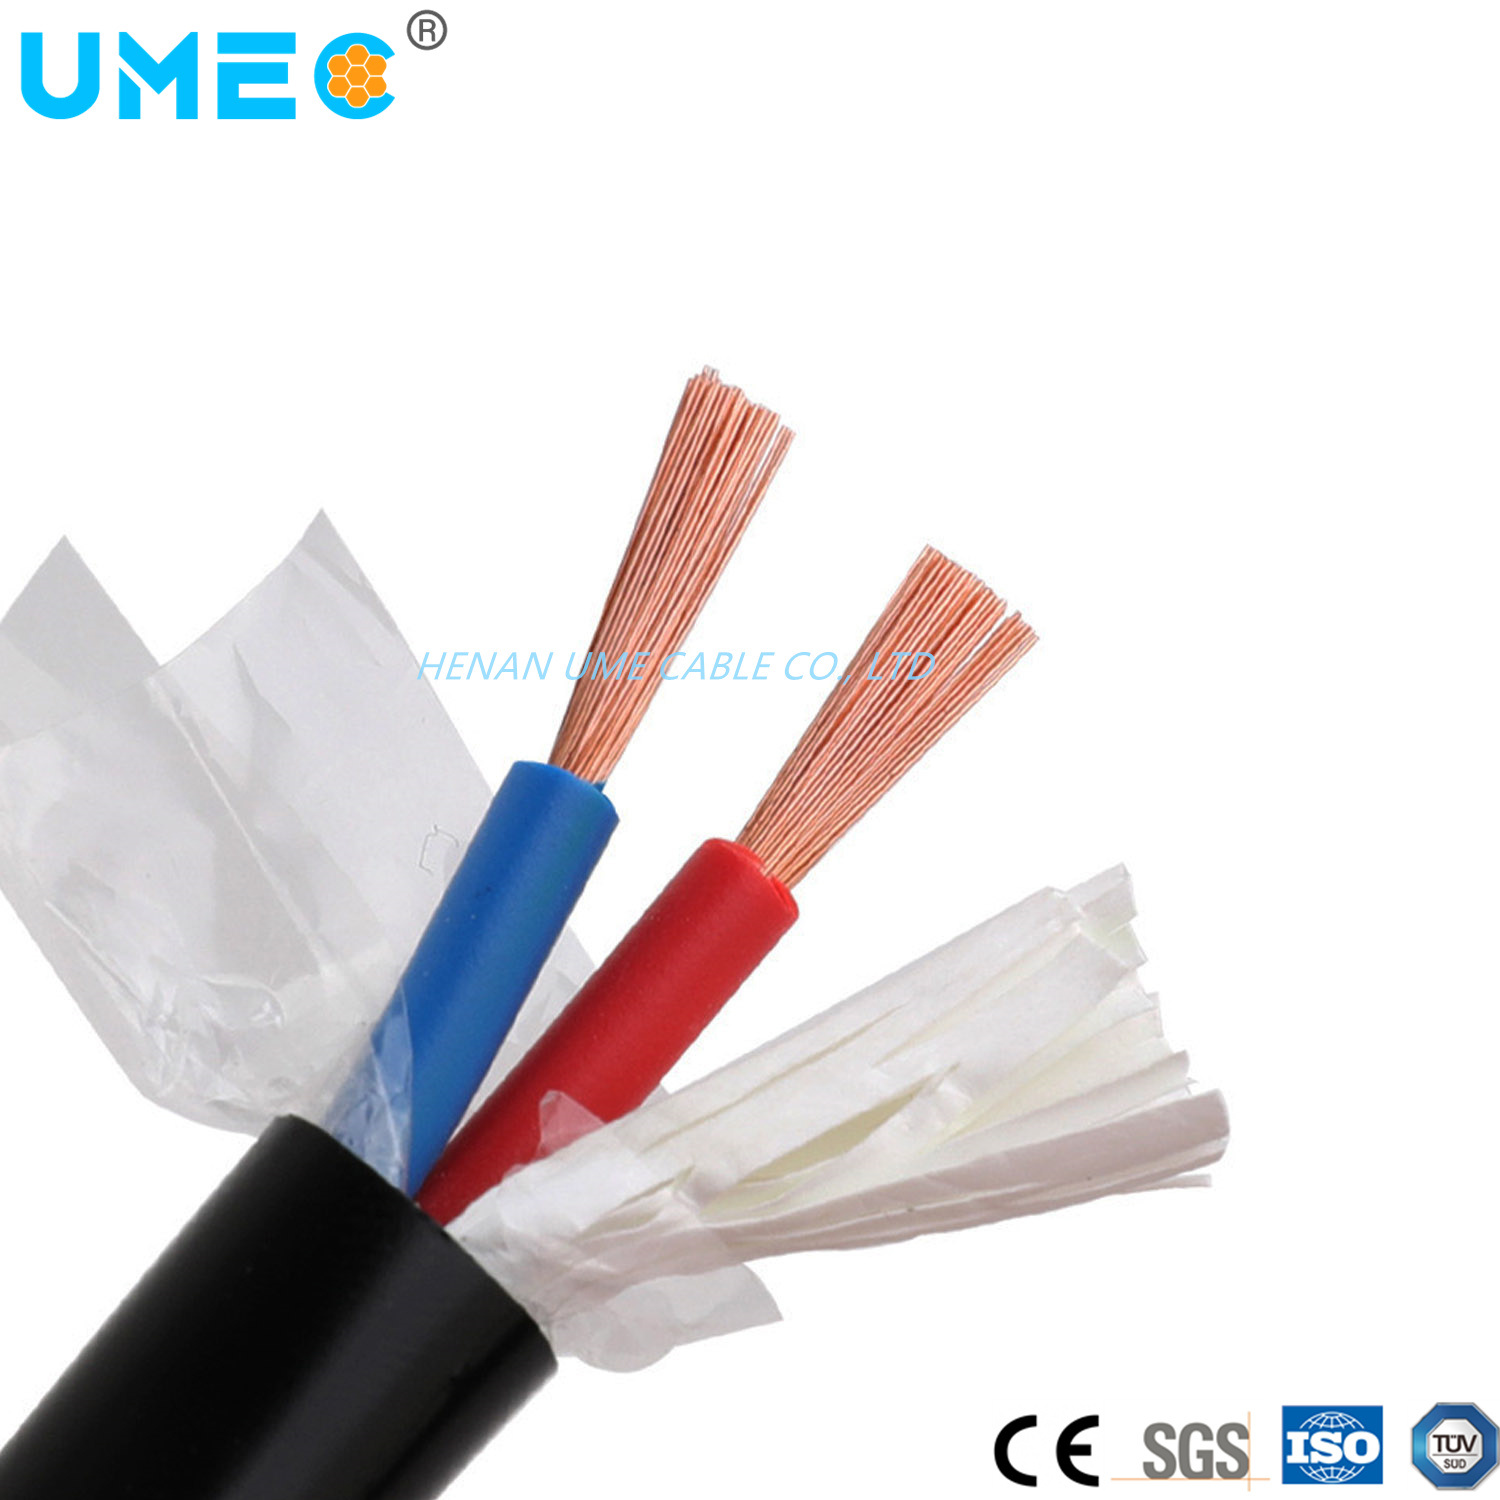 Electrical Supplier Flexible Cable Copper Core PVC Insulated Wire Sheathed Electrical Wire House Wiring 1.5mm 2.5mm 4mm 6mm Rvv Myym H05VV-F